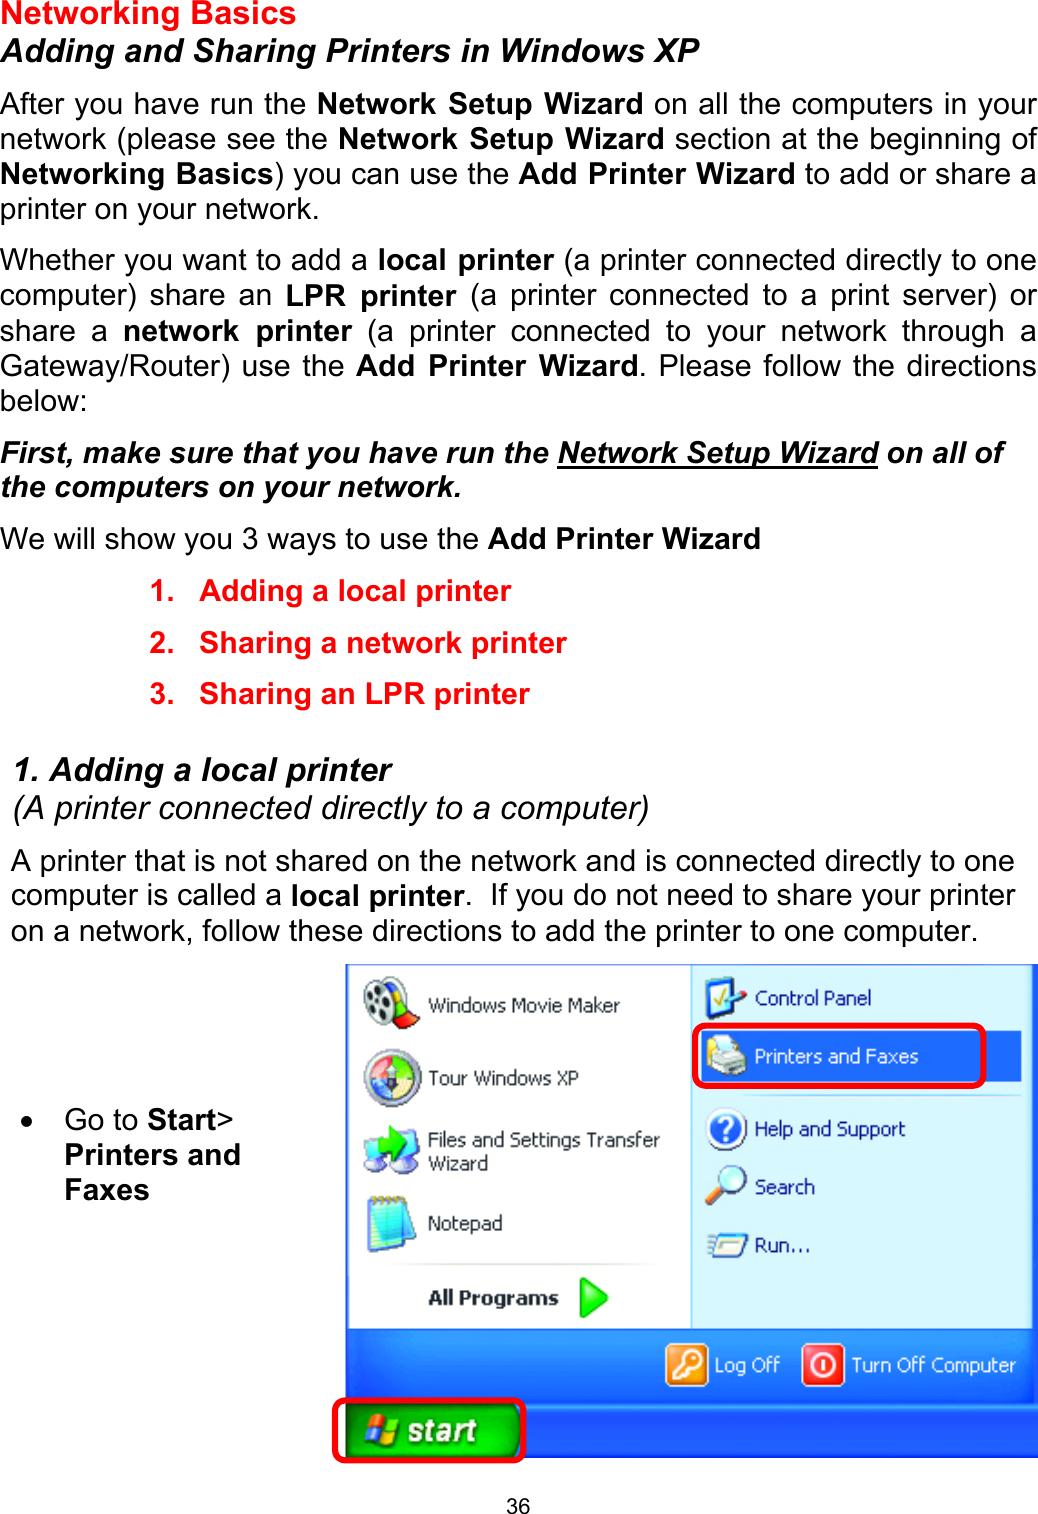  36Networking Basics Adding and Sharing Printers in Windows XP After you have run the Network Setup Wizard on all the computers in your network (please see the Network Setup Wizard section at the beginning of Networking Basics) you can use the Add Printer Wizard to add or share a printer on your network.   Whether you want to add a local printer (a printer connected directly to one computer) share an LPR printer (a printer connected to a print server) or share a network printer (a printer connected to your network through a Gateway/Router) use the Add Printer Wizard. Please follow the directions below: First, make sure that you have run the Network Setup Wizard on all of the computers on your network. We will show you 3 ways to use the Add Printer Wizard 1.  Adding a local printer 2.  Sharing a network printer 3.  Sharing an LPR printer  1. Adding a local printer                                                                   (A printer connected directly to a computer) A printer that is not shared on the network and is connected directly to one computer is called a local printer.  If you do not need to share your printer on a network, follow these directions to add the printer to one computer.  •  Go to Start&gt; Printers and Faxes   